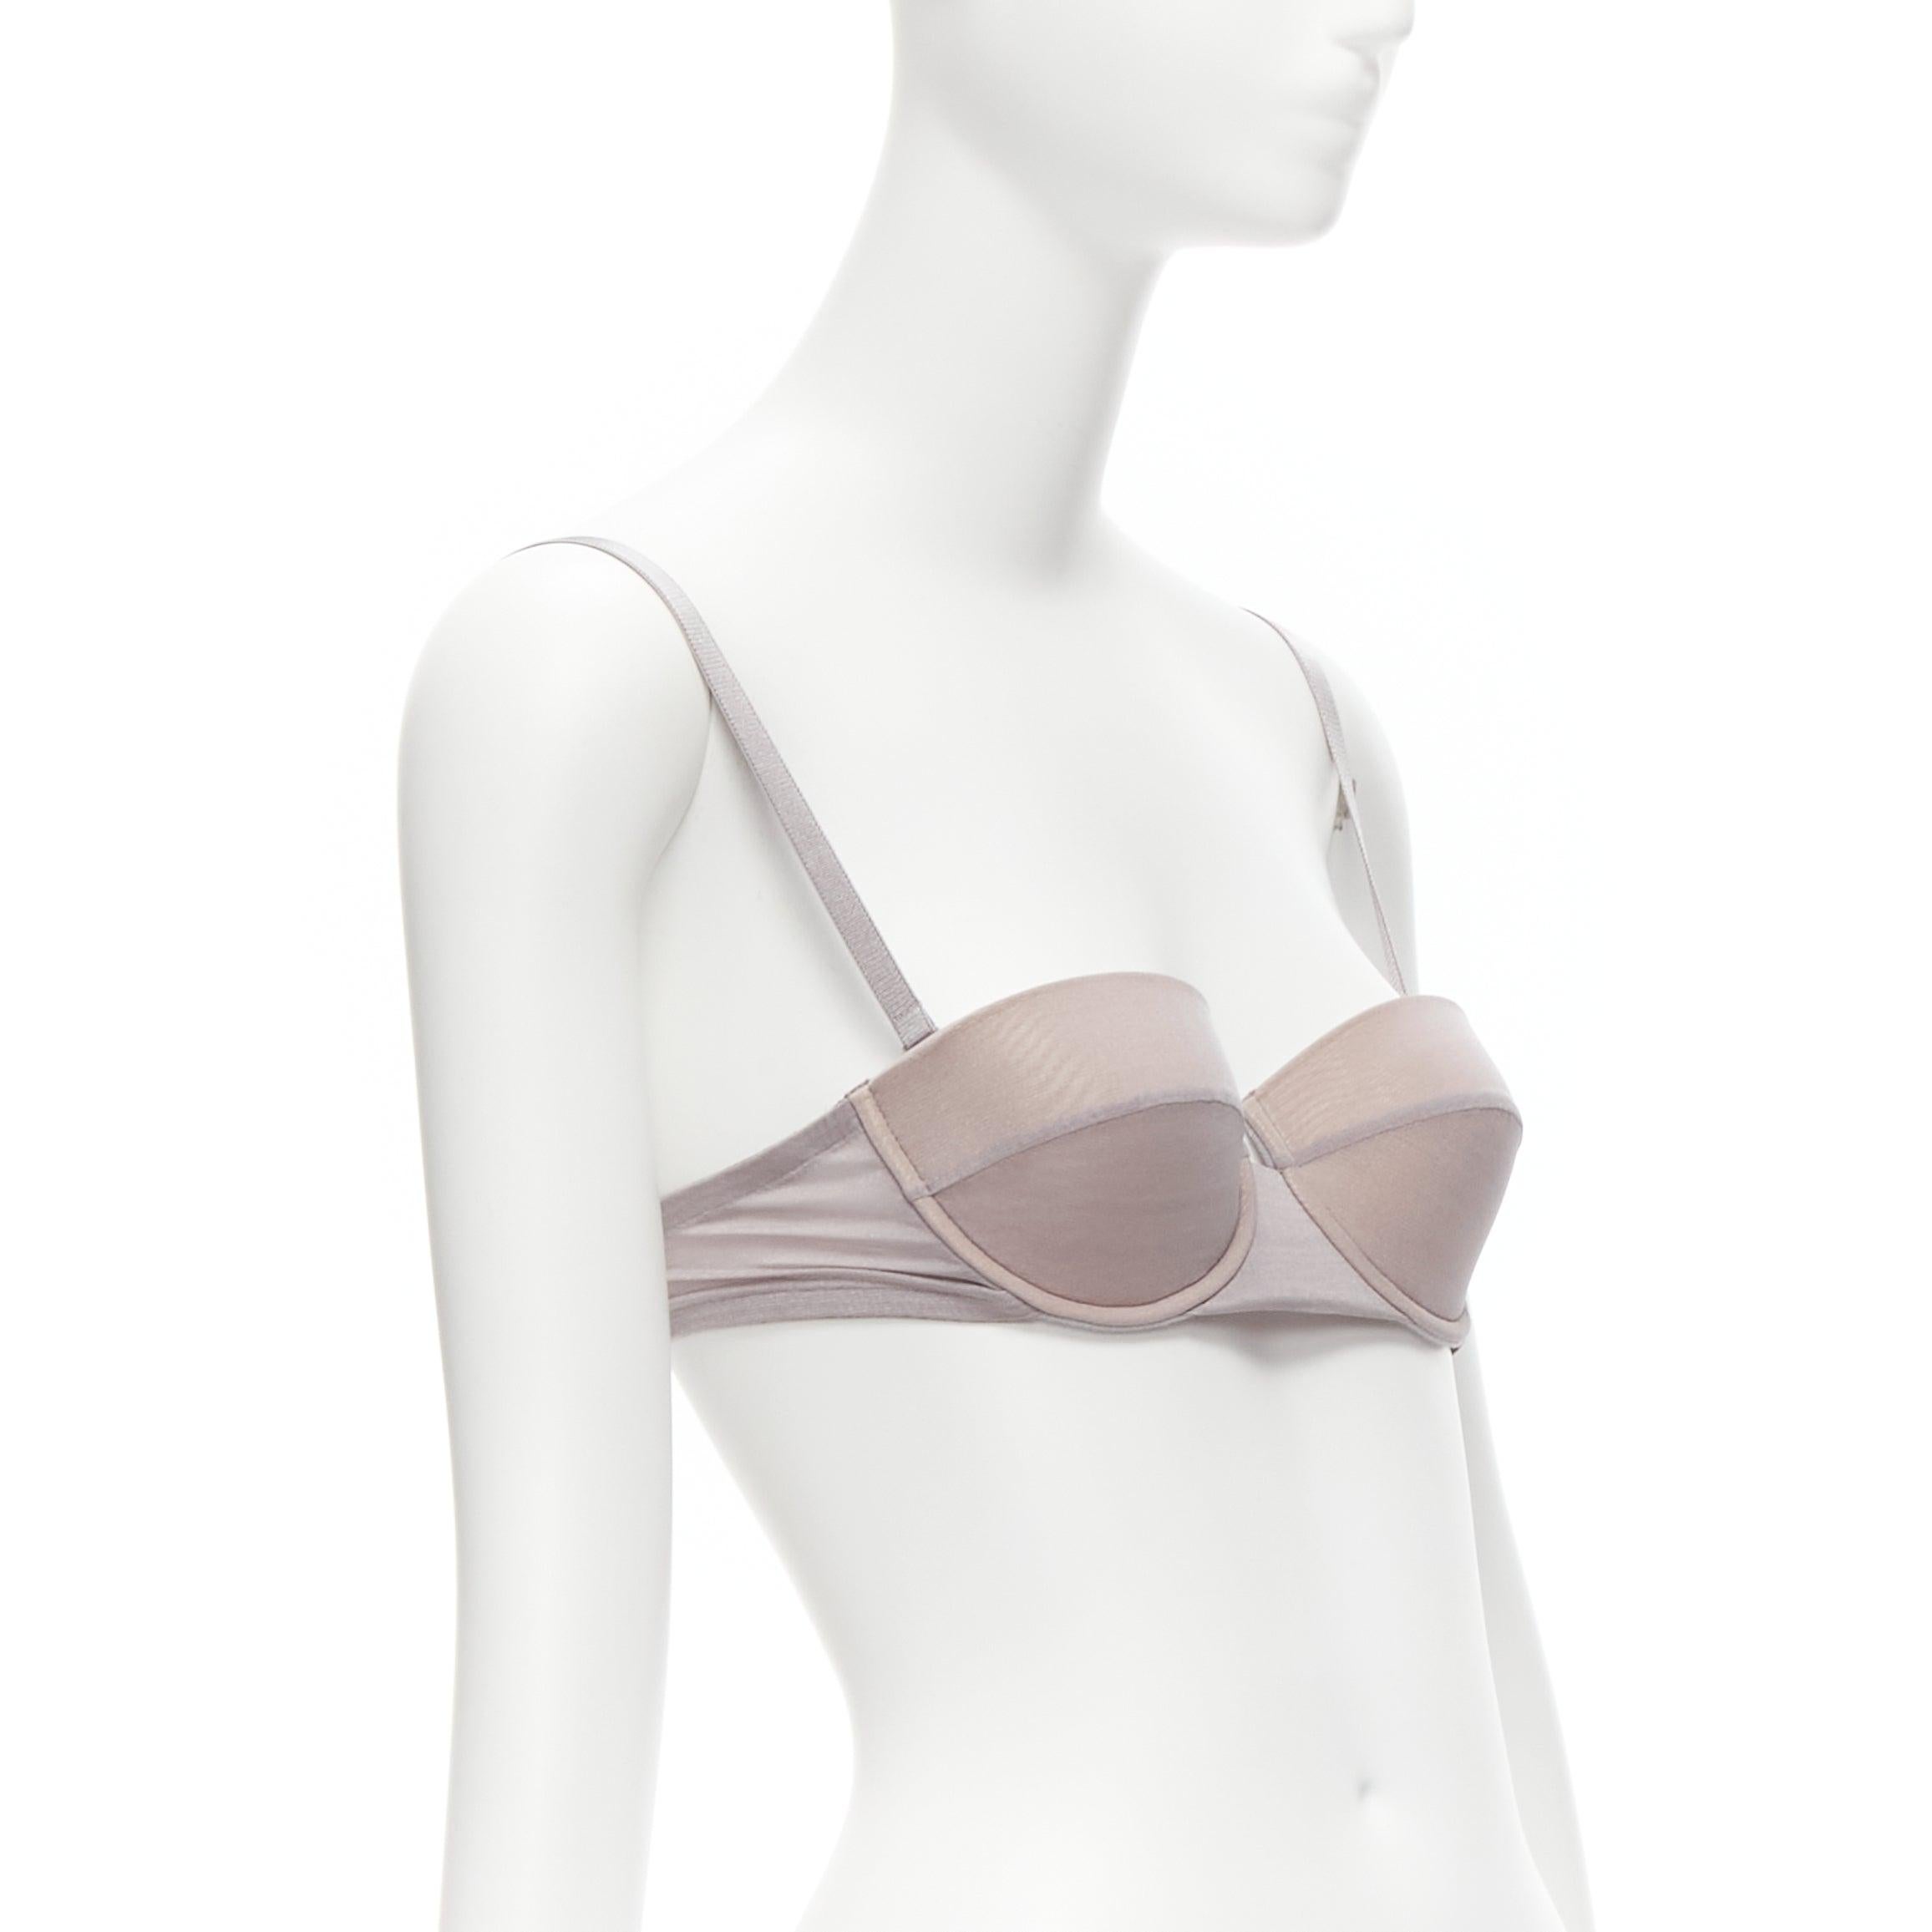 GUCCI Tom Ford 2001 Vintage grey nude mesh 3D cut cup fashion bra M
Reference: PYCN/A00081
Brand: Gucci
Designer: Tom Ford
Collection: SS 2001
Material: Polyamide, Blend
Color: Grey, Nude
Pattern: Solid
Closure: Hook & Eye
Lining: Nude Fabric
Extra